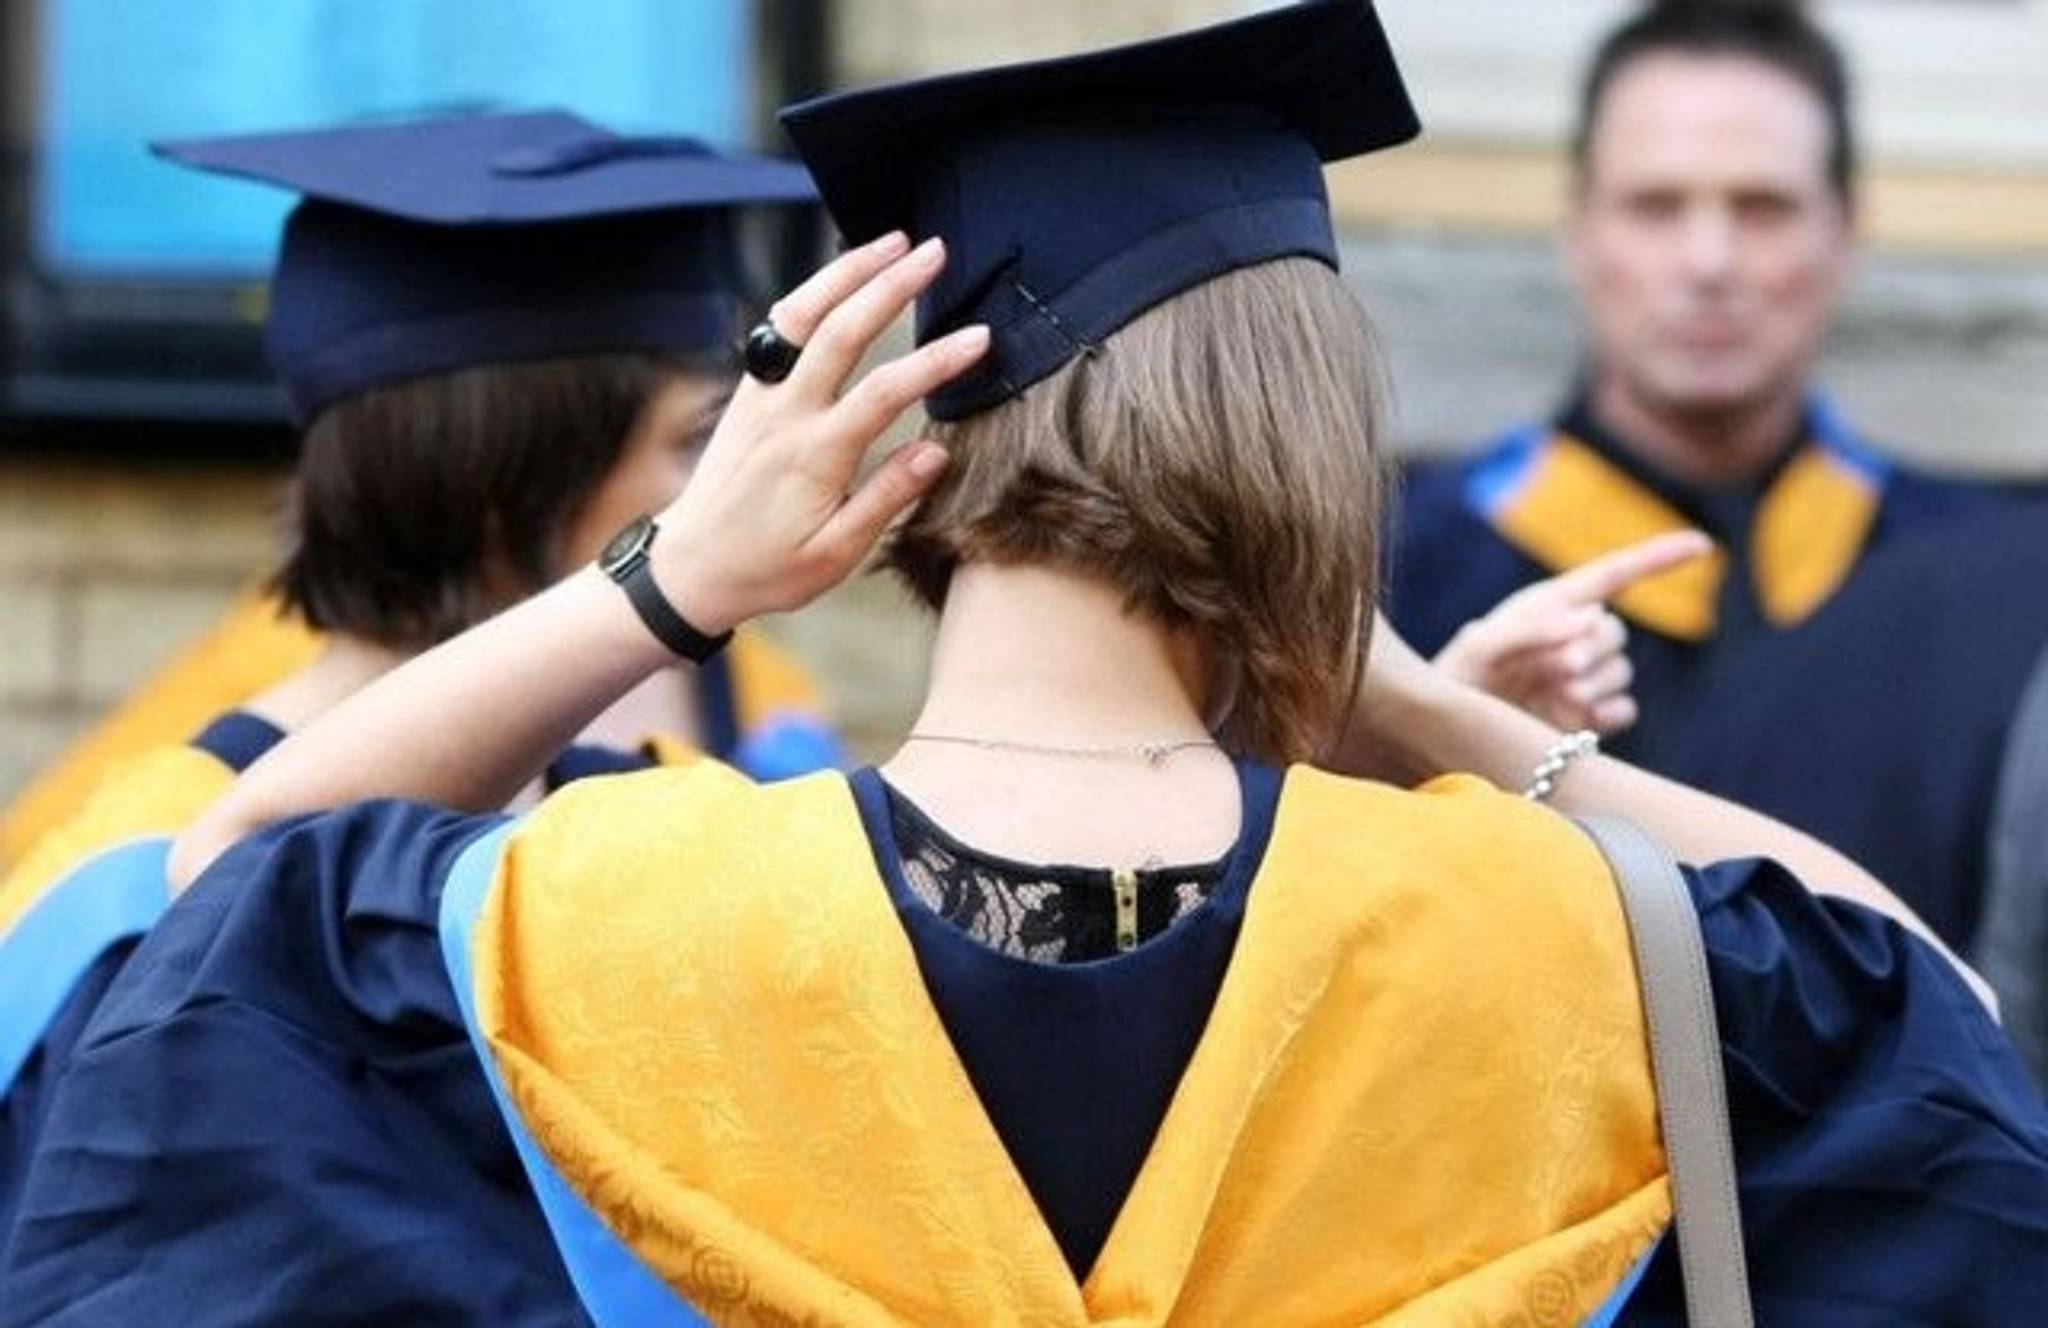 UK employers lure new grads with higher wages